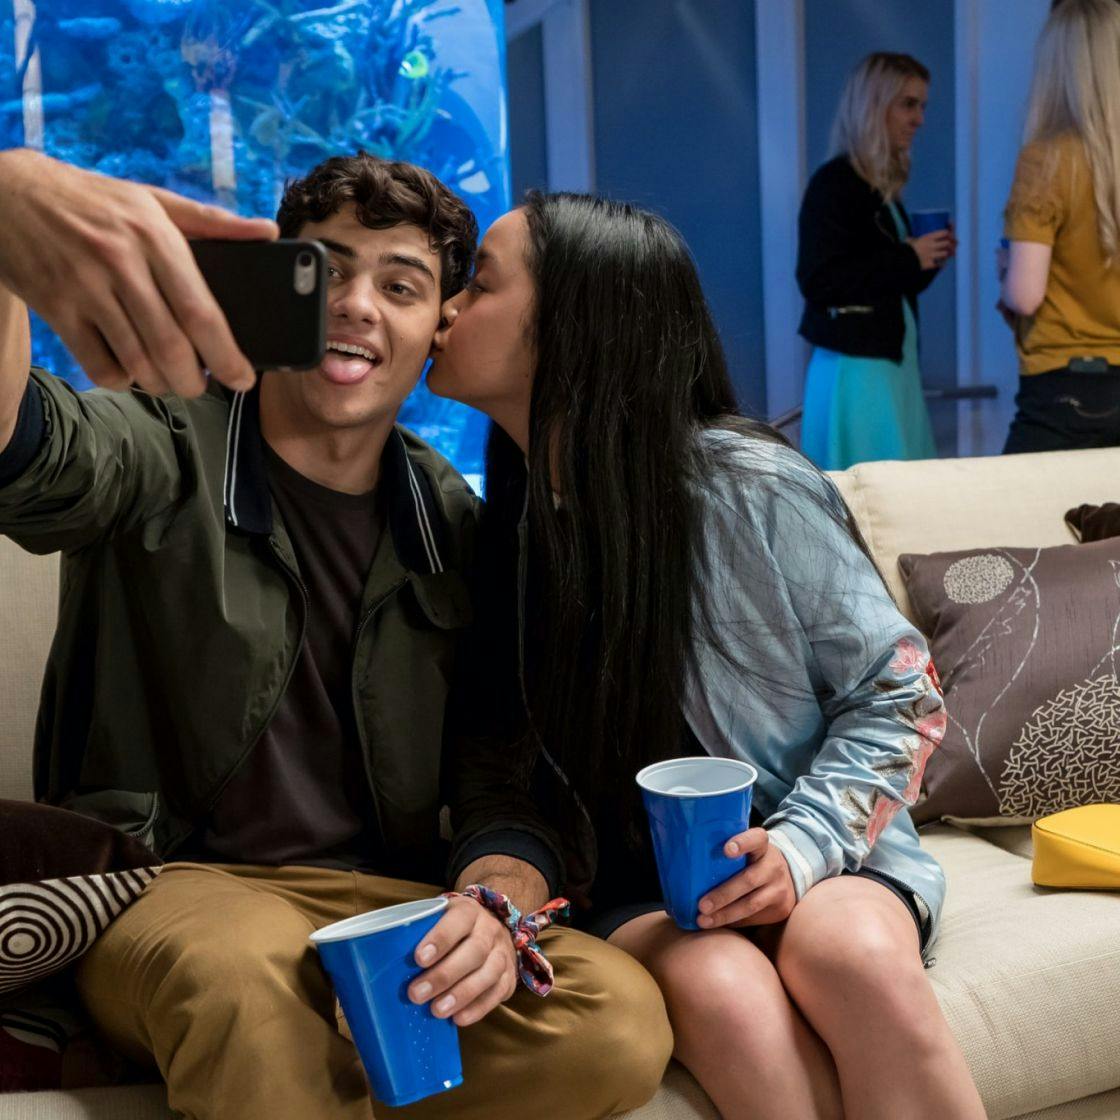 To All The Boys Ive Loved Before Sequel: Release Date, Cast